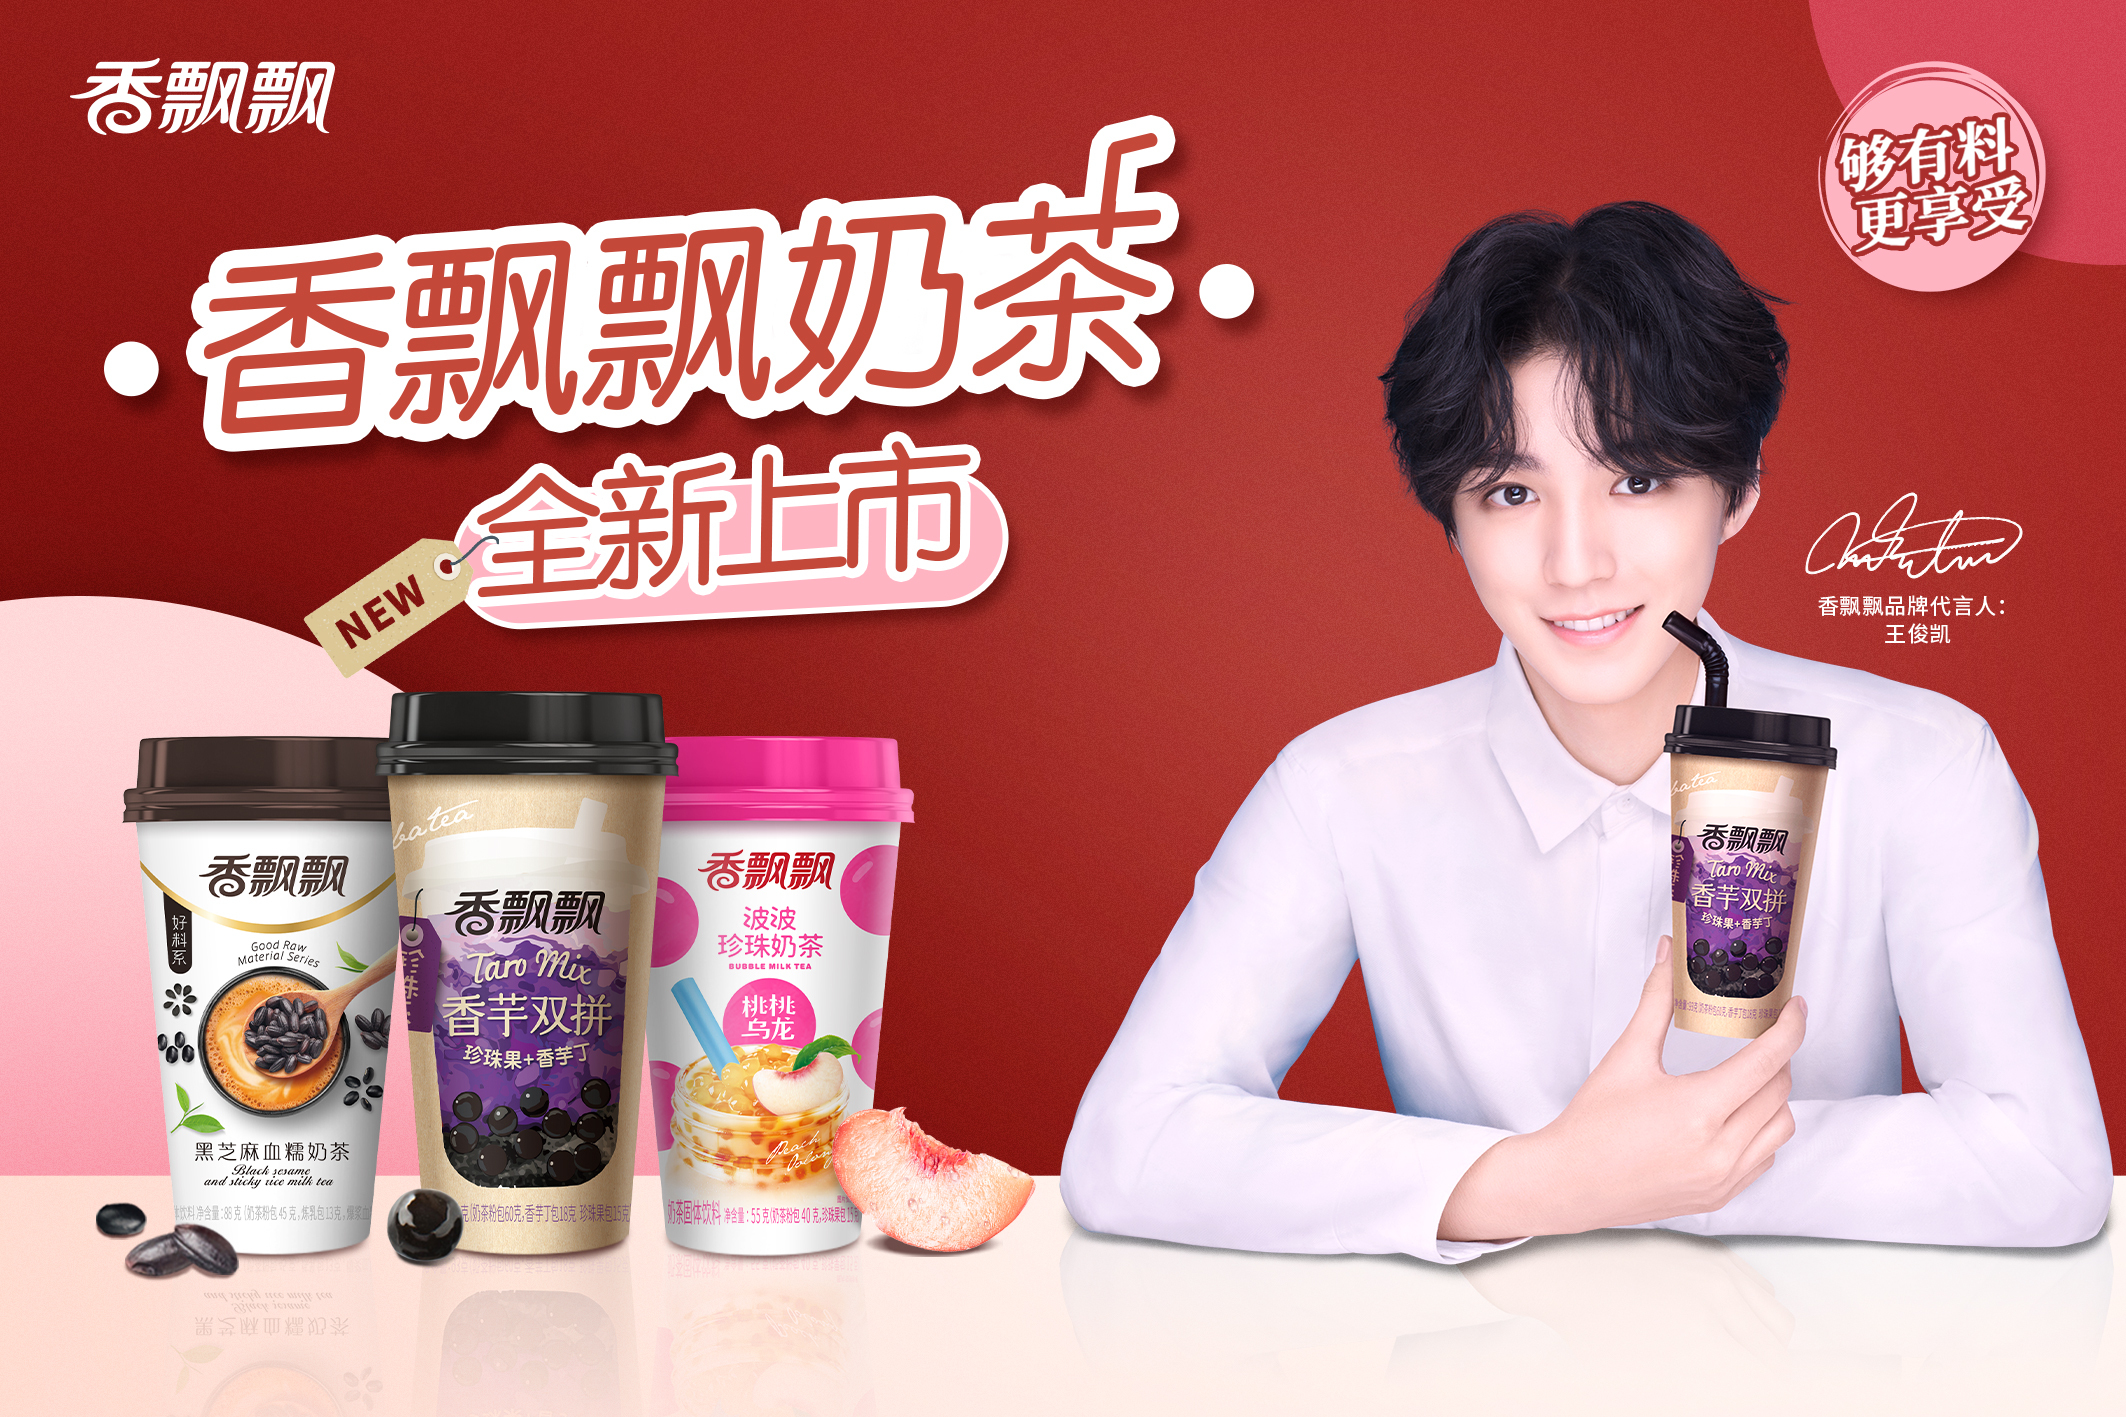 Xiang PiaoPiao released six new milk teas, and Wangjunkai continued to act as the spokesman